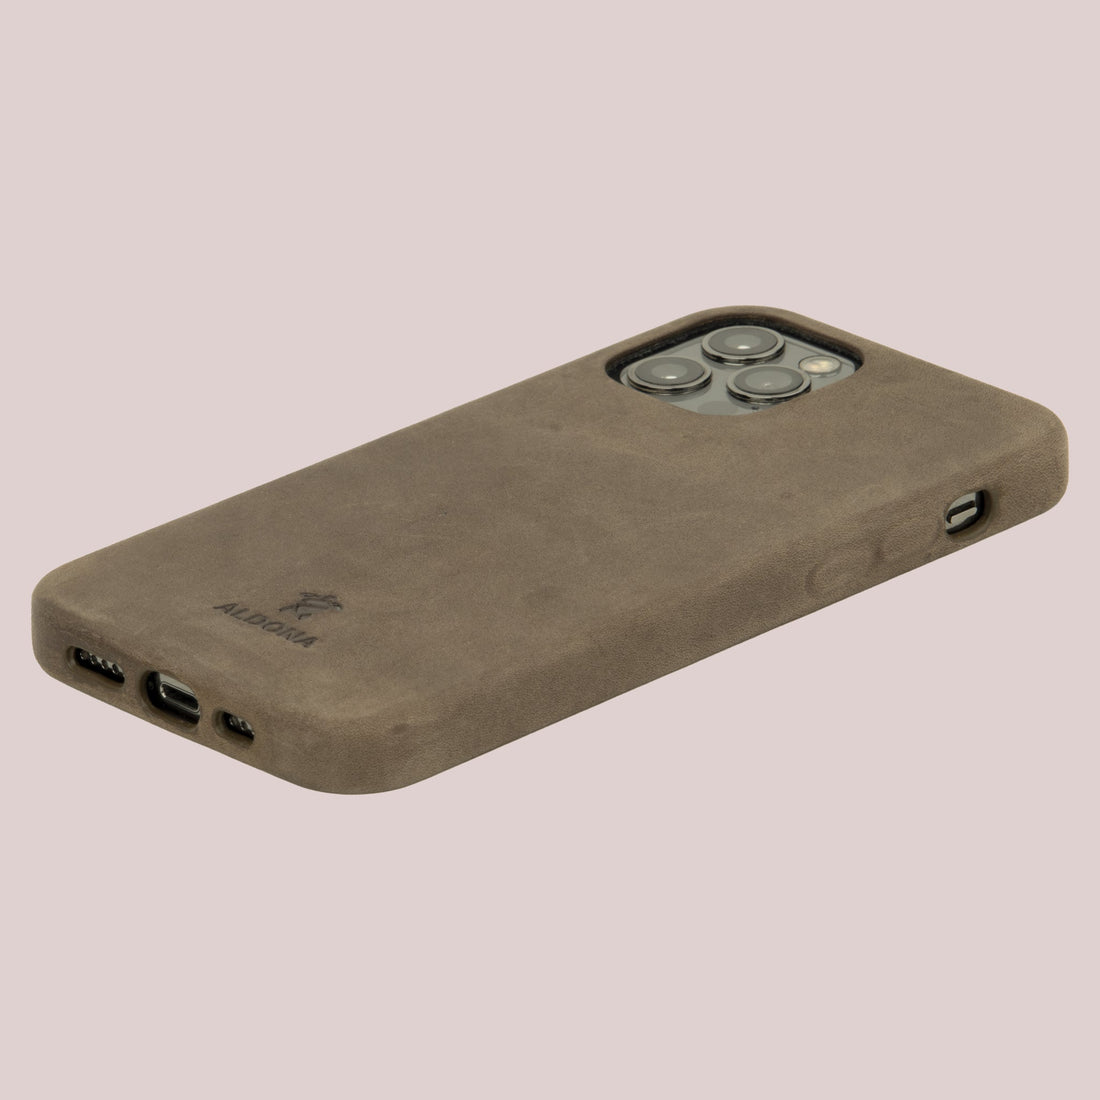 Kalon Case for iPhone 14 Pro with MagSafe Compatibility - Dark Soil